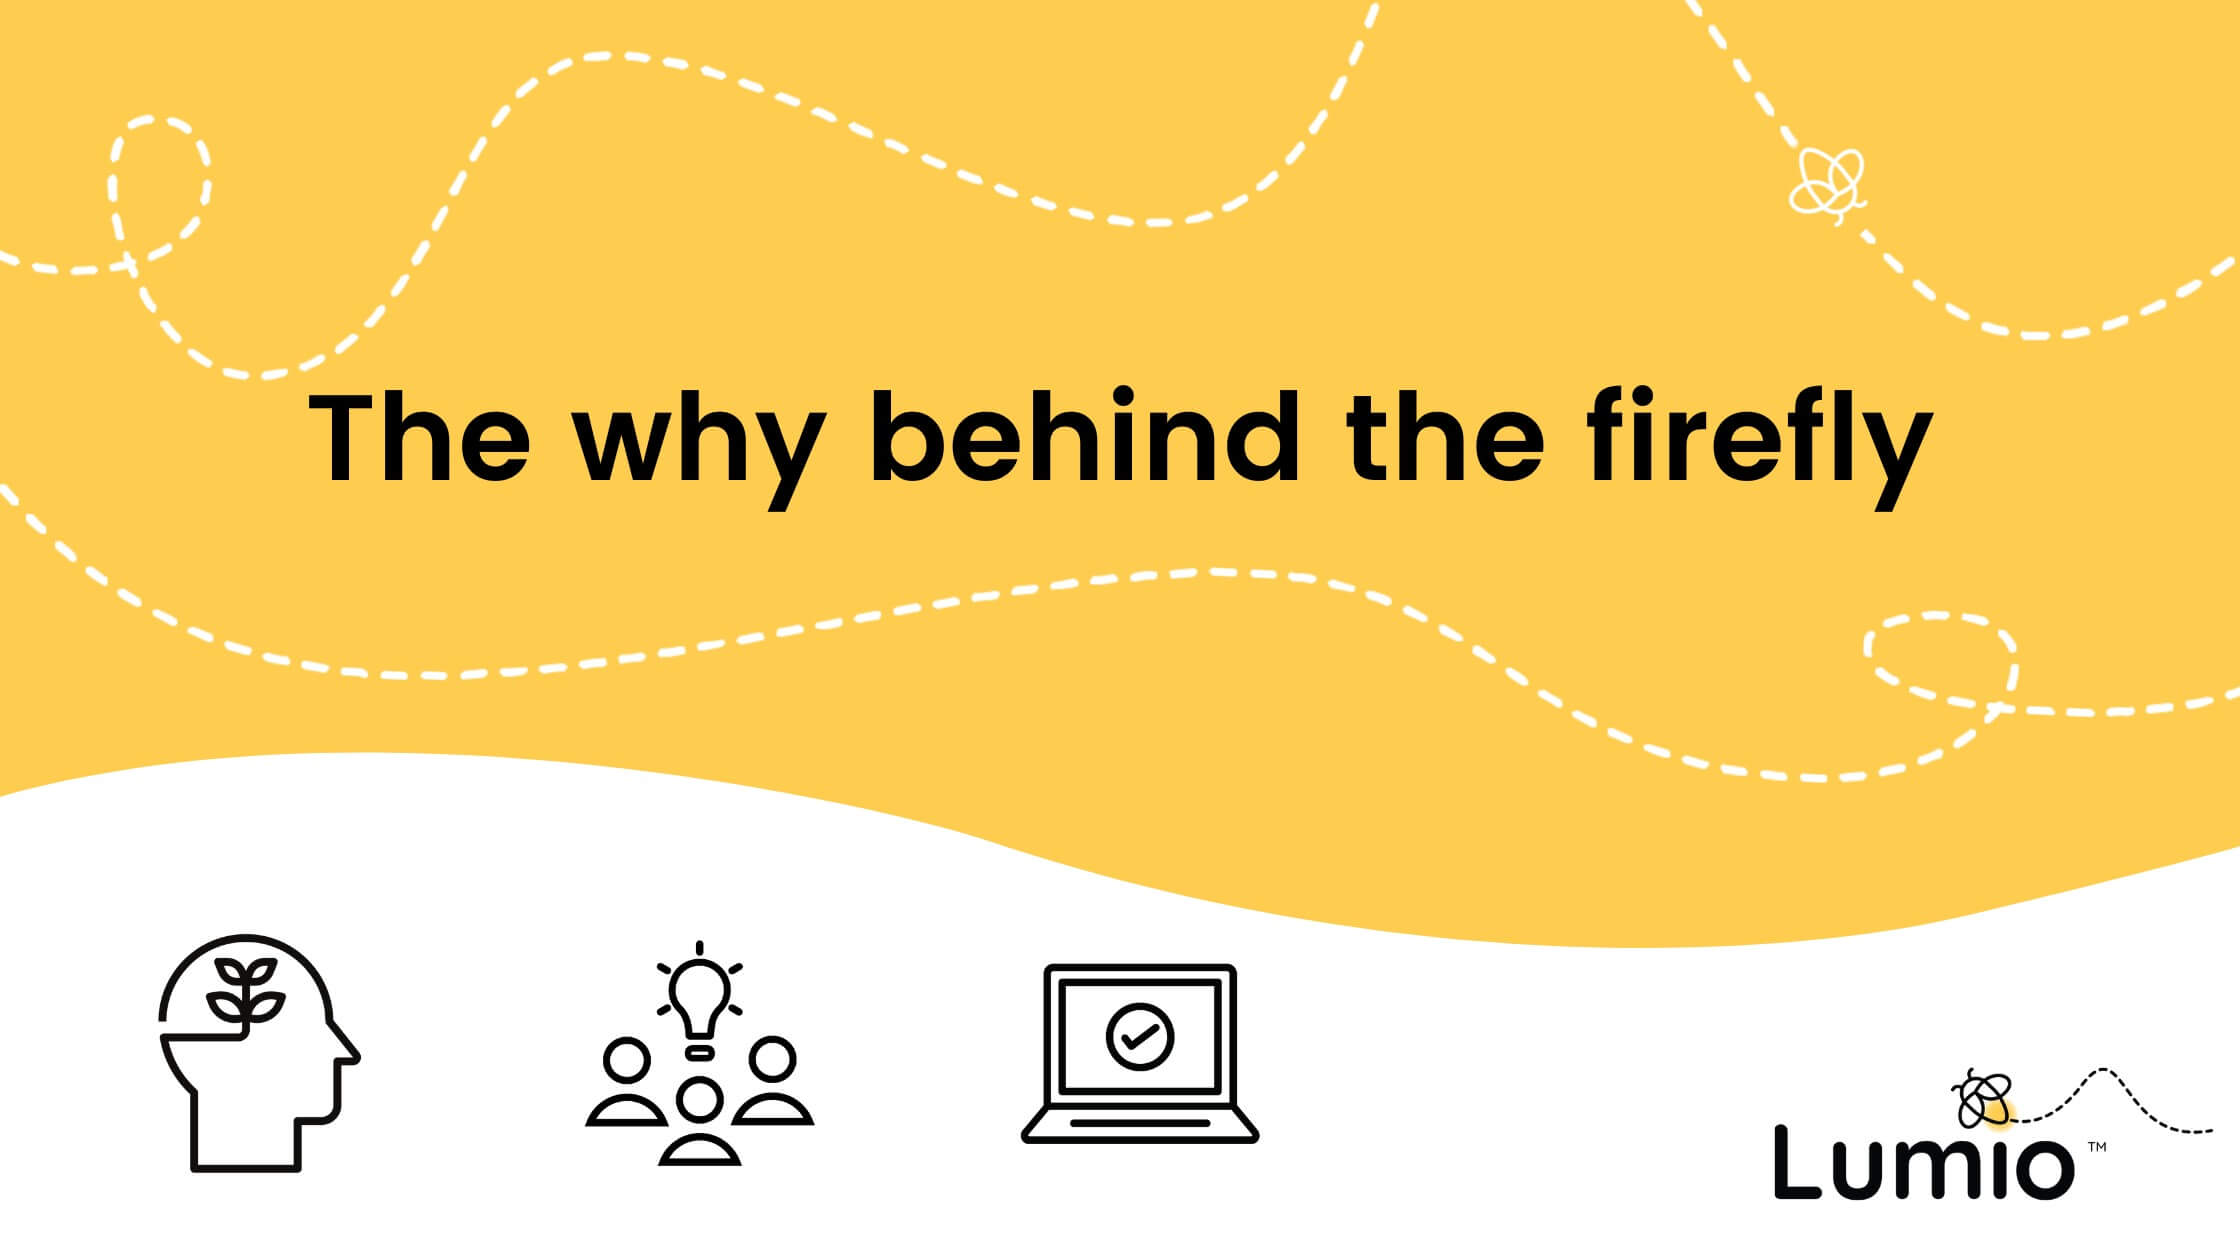 Yellow and white graphic with icons representing student engagement, comprehension and accessibility. The title “The why behind the firefly” appears in the center.